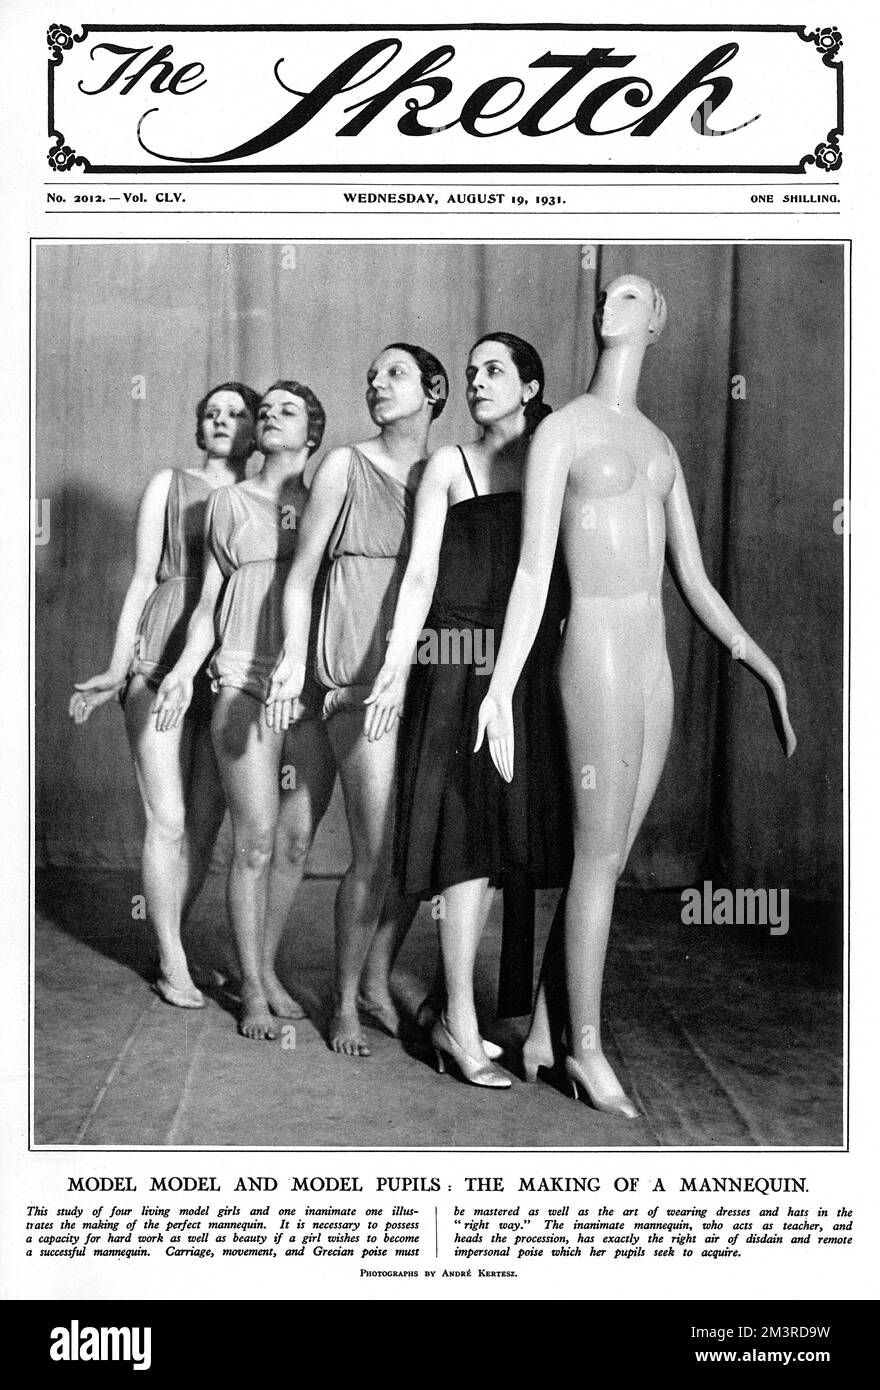 Front cover of The Sketch magazine showing four living models and one inanimate one.  It comments that, 'the inanimate mannequin, who acts as teacher, and heads the procession, has exactly the right air of disdain and remote impersonal pose which her pupils seek to acquire.'     Date: 1931 Stock Photo